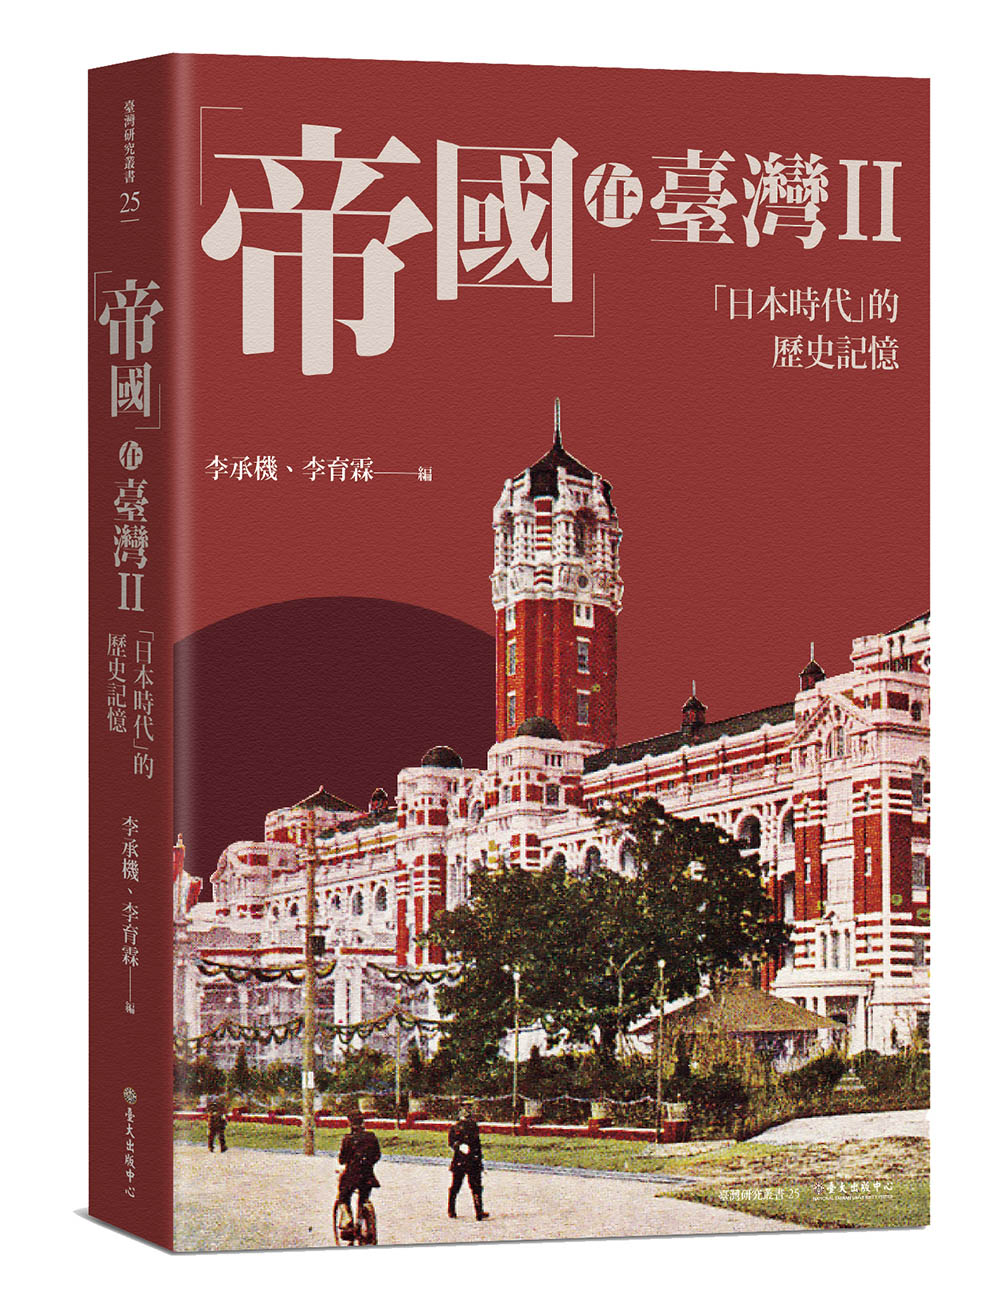 The Empires on Taiwan II : The Historic Memory of 